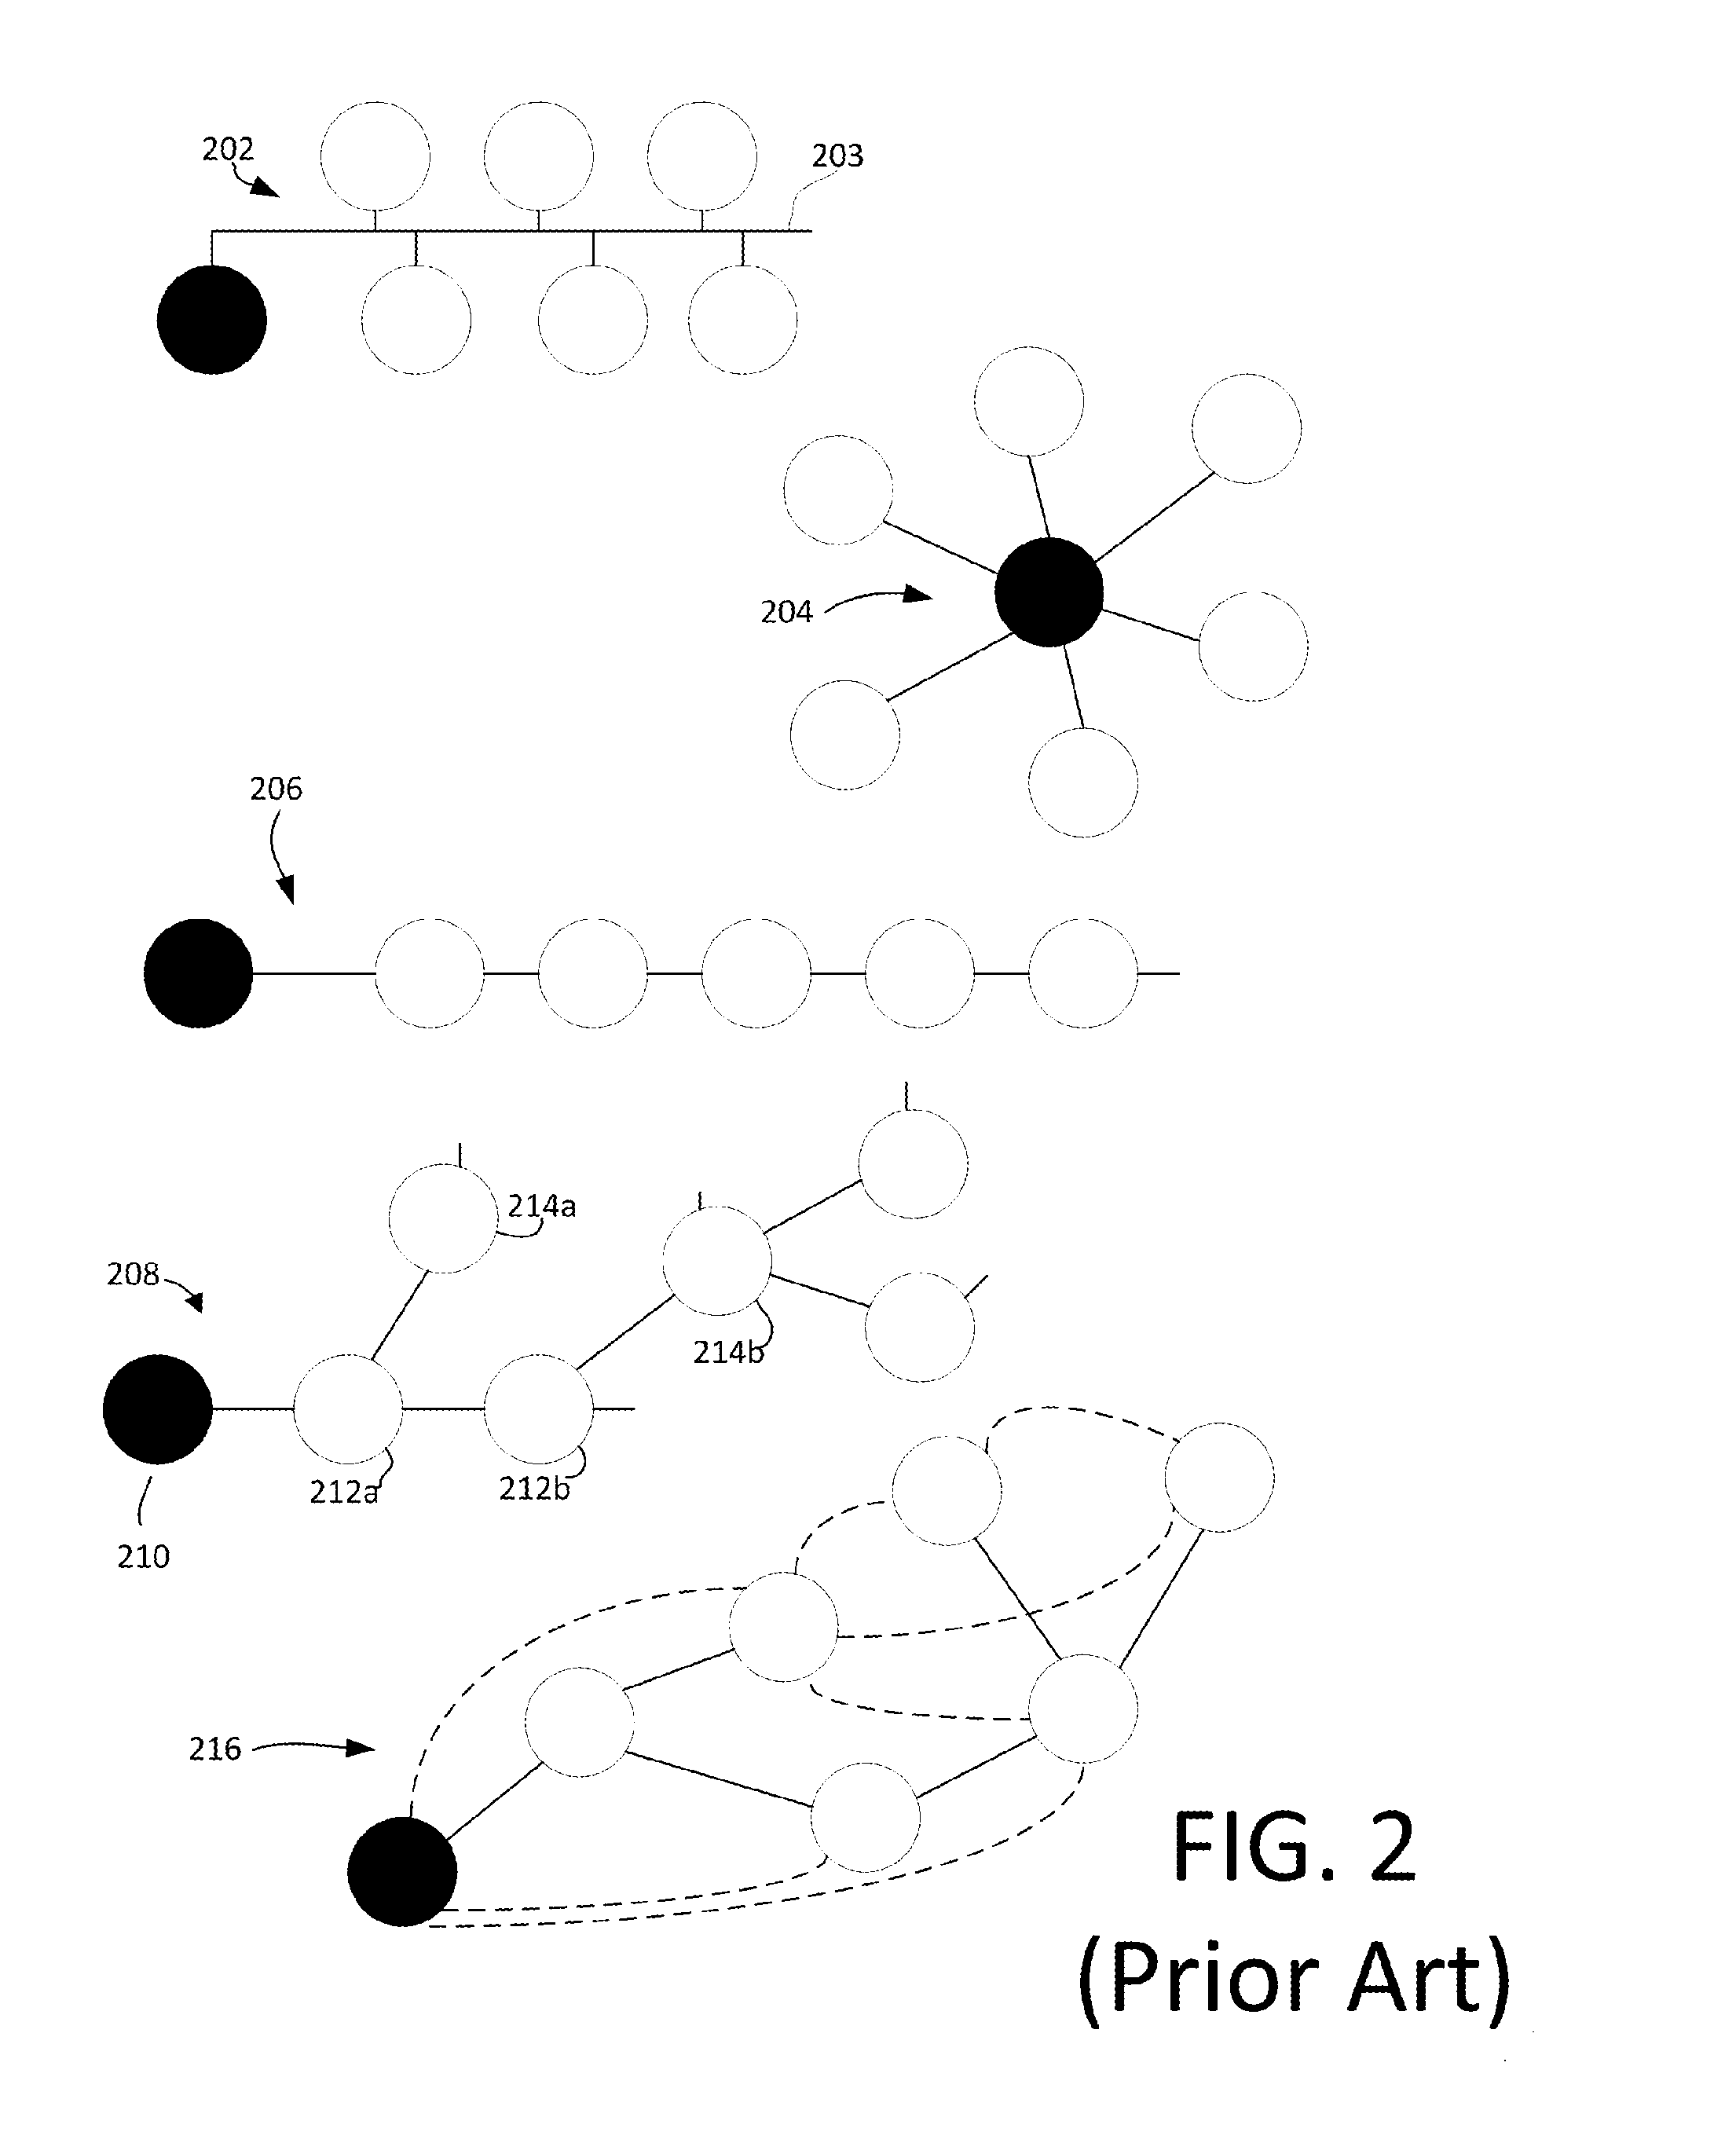 Shading Control Network Using a Control Network